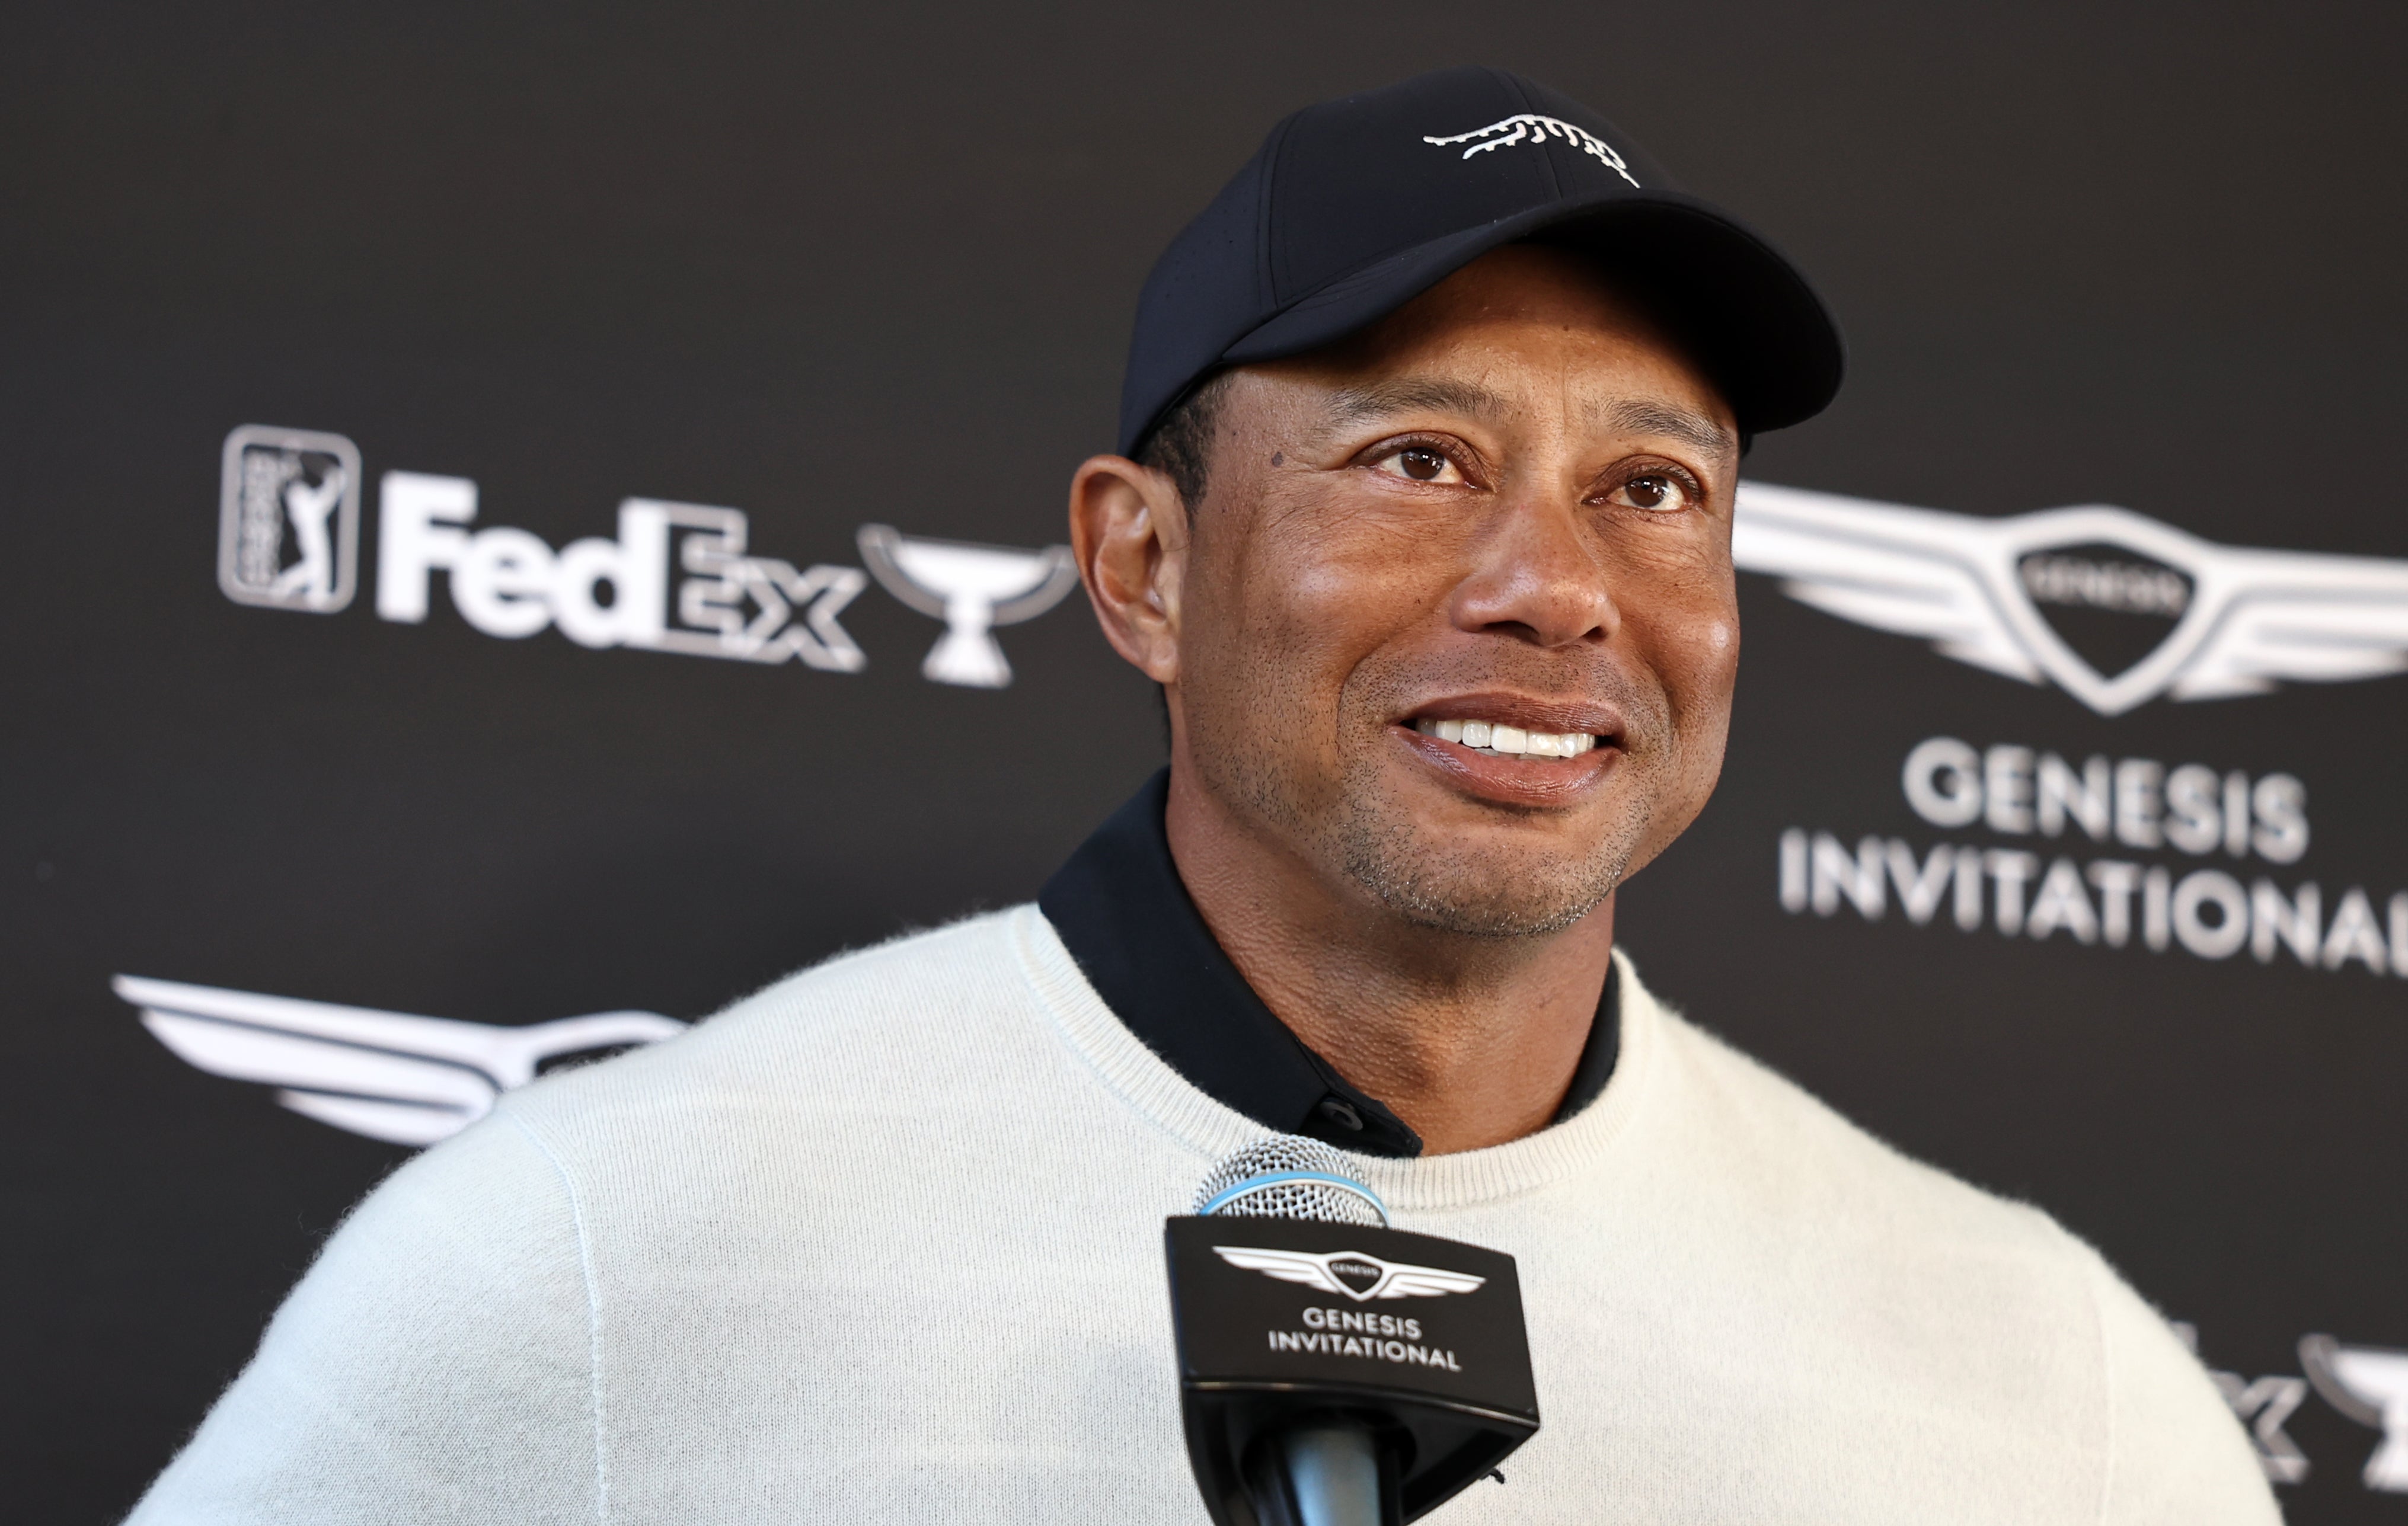 Tiger Woods revealed that talks are ongoing about LIV players returning to PGA Tour